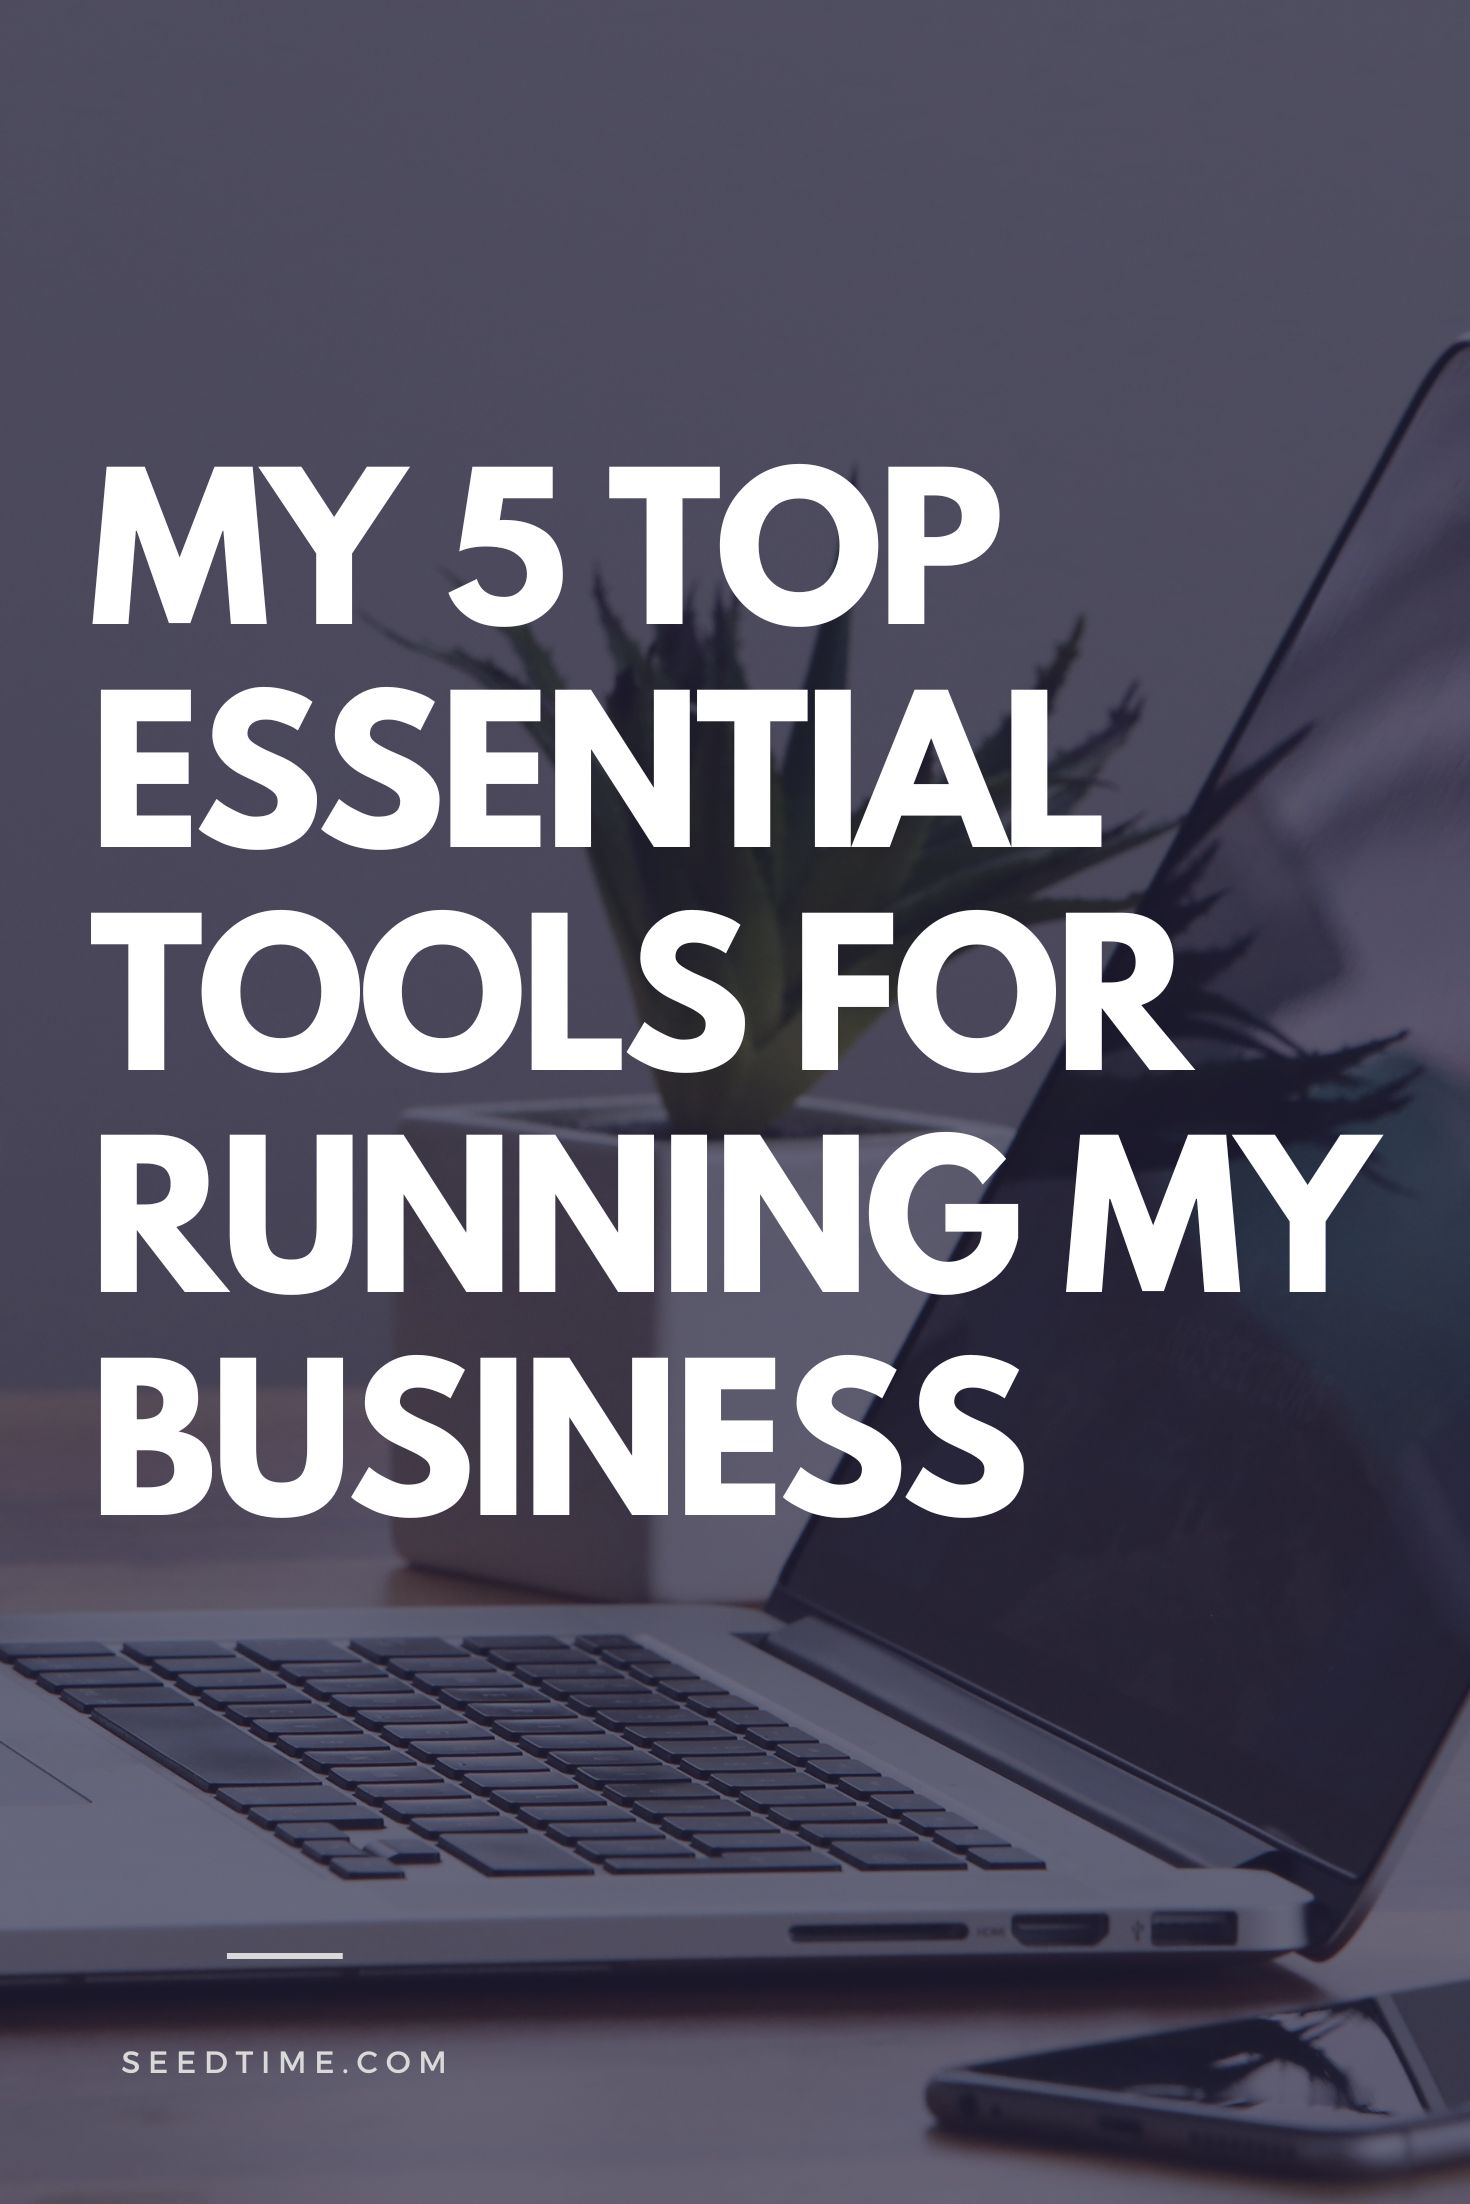 As a business owner, I get questions A LOT about the tools I use to run my business. So, I thought I would share a few that have REALLY helped me a lot in case they might help you as well.